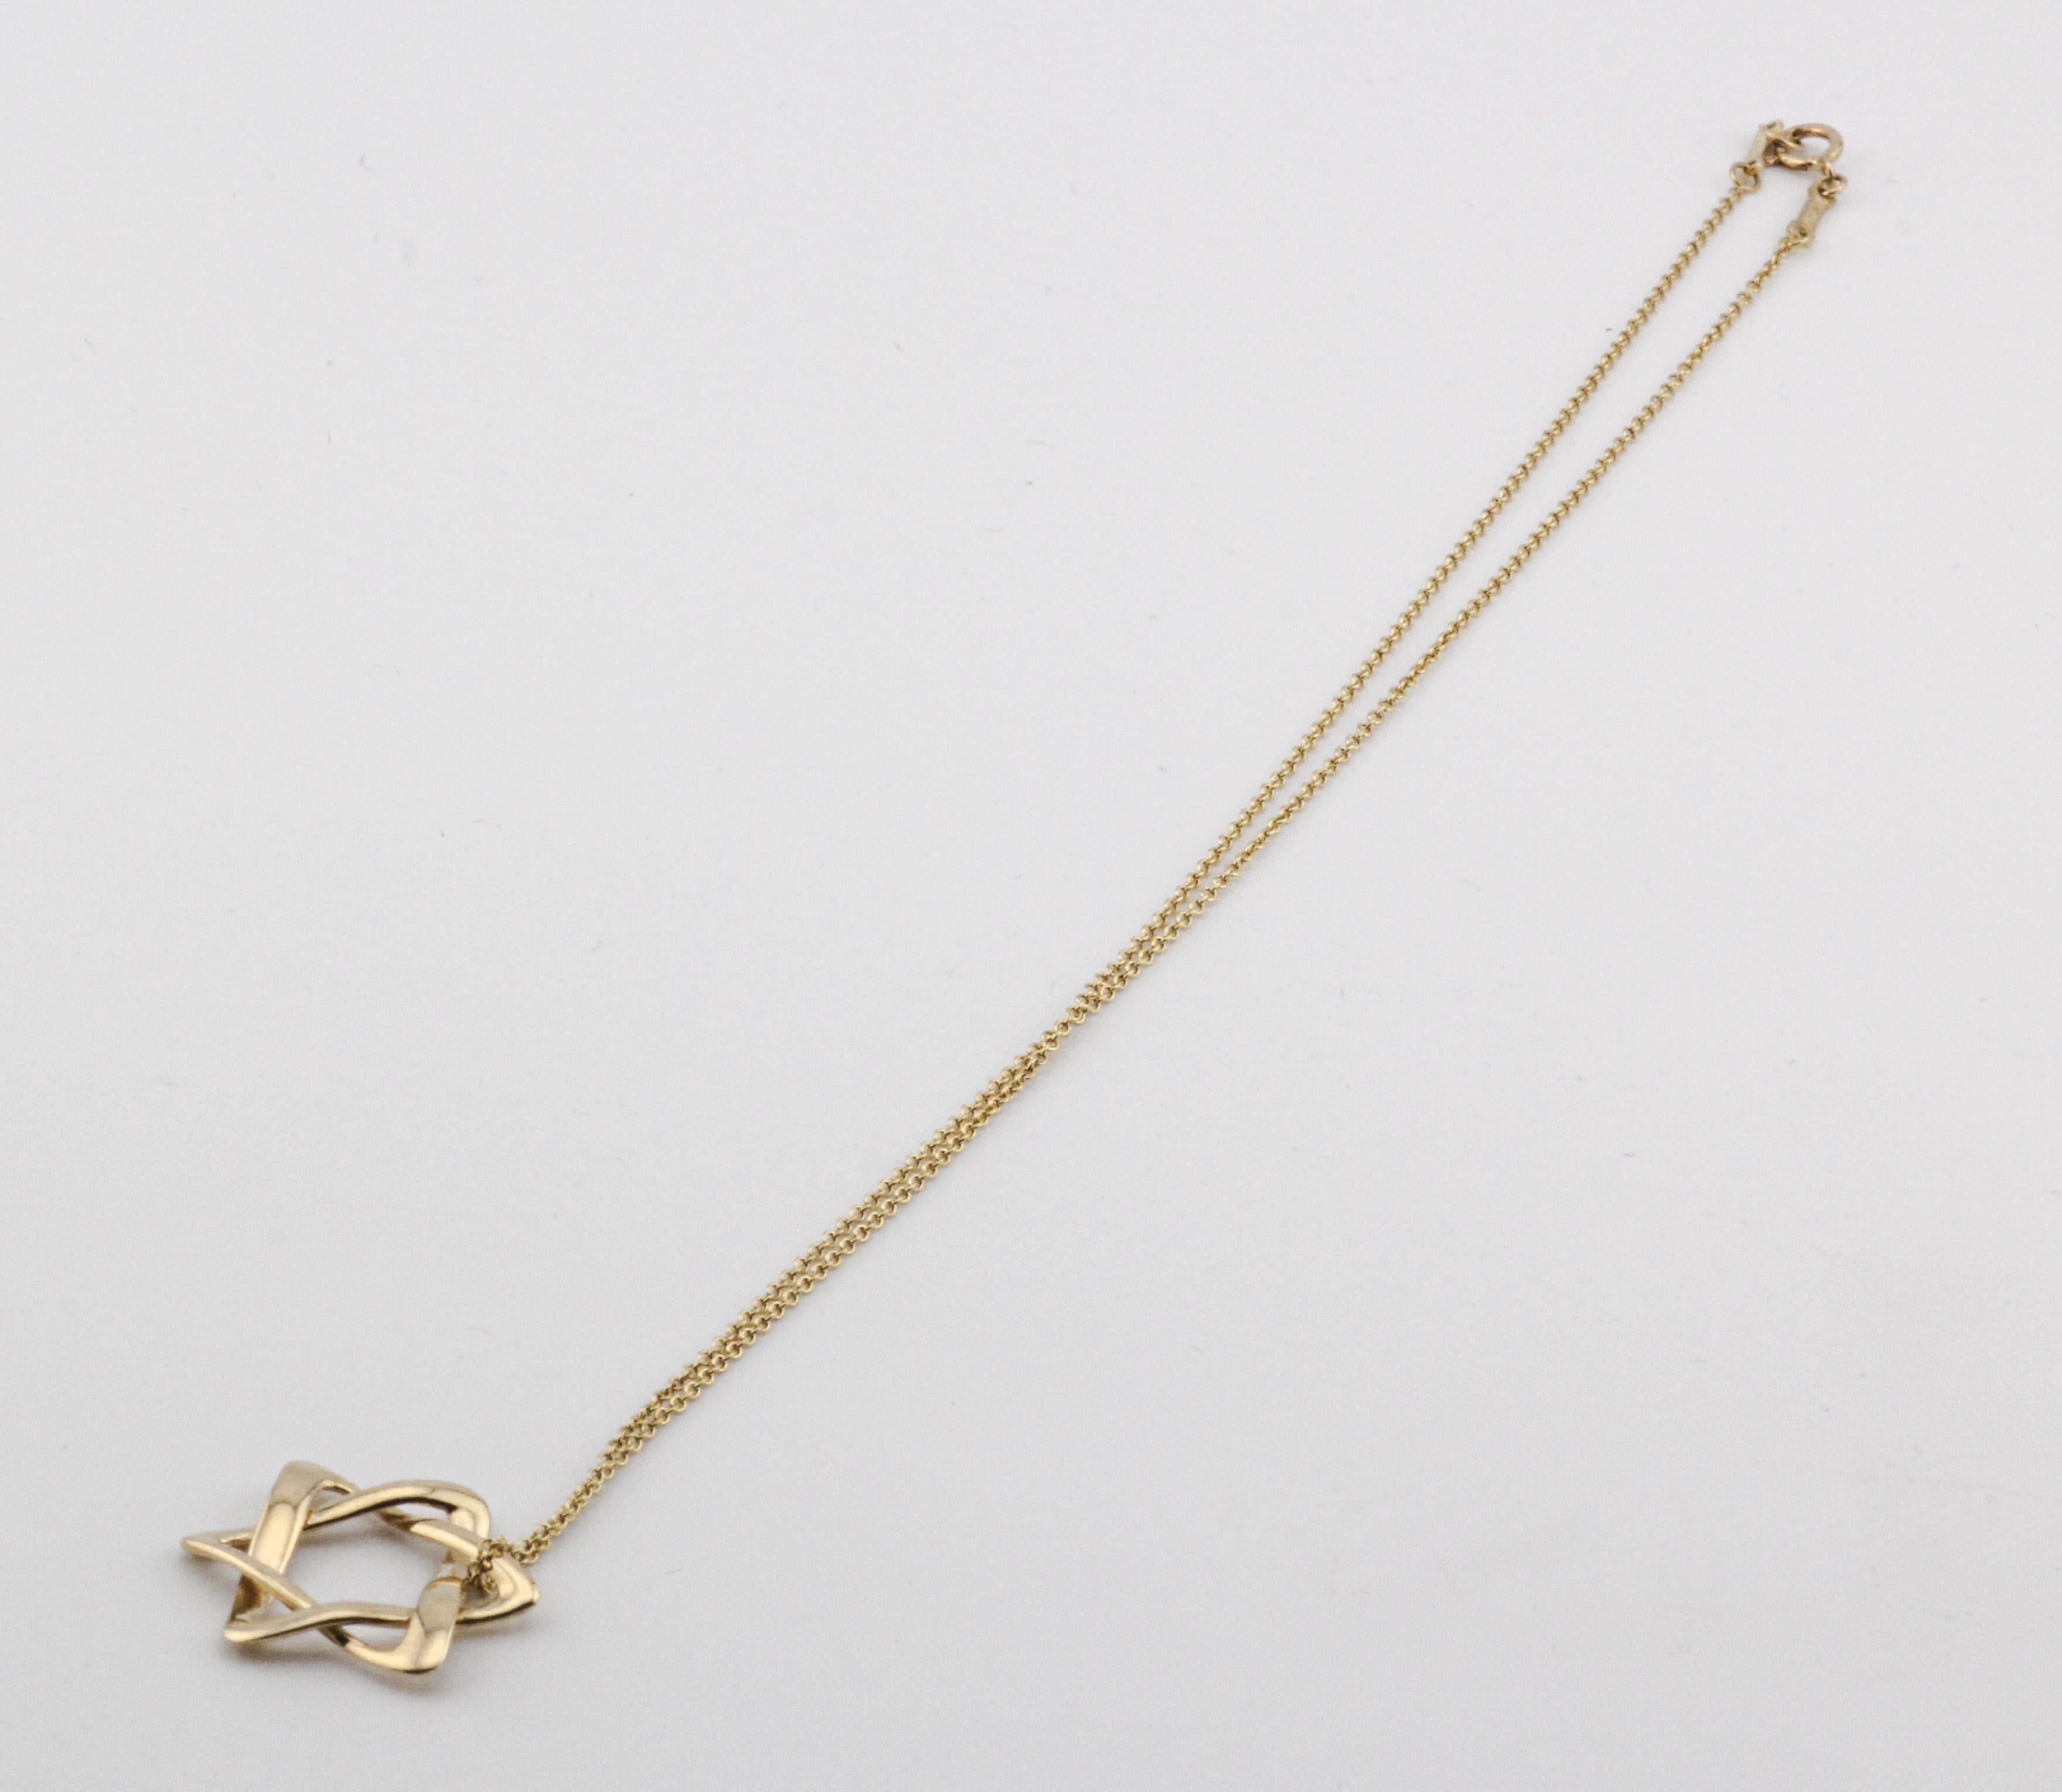 Tiffany & Co. Elsa Peretti 18K Yellow Gold Large Star of David Pendant Necklace In Good Condition For Sale In Bellmore, NY